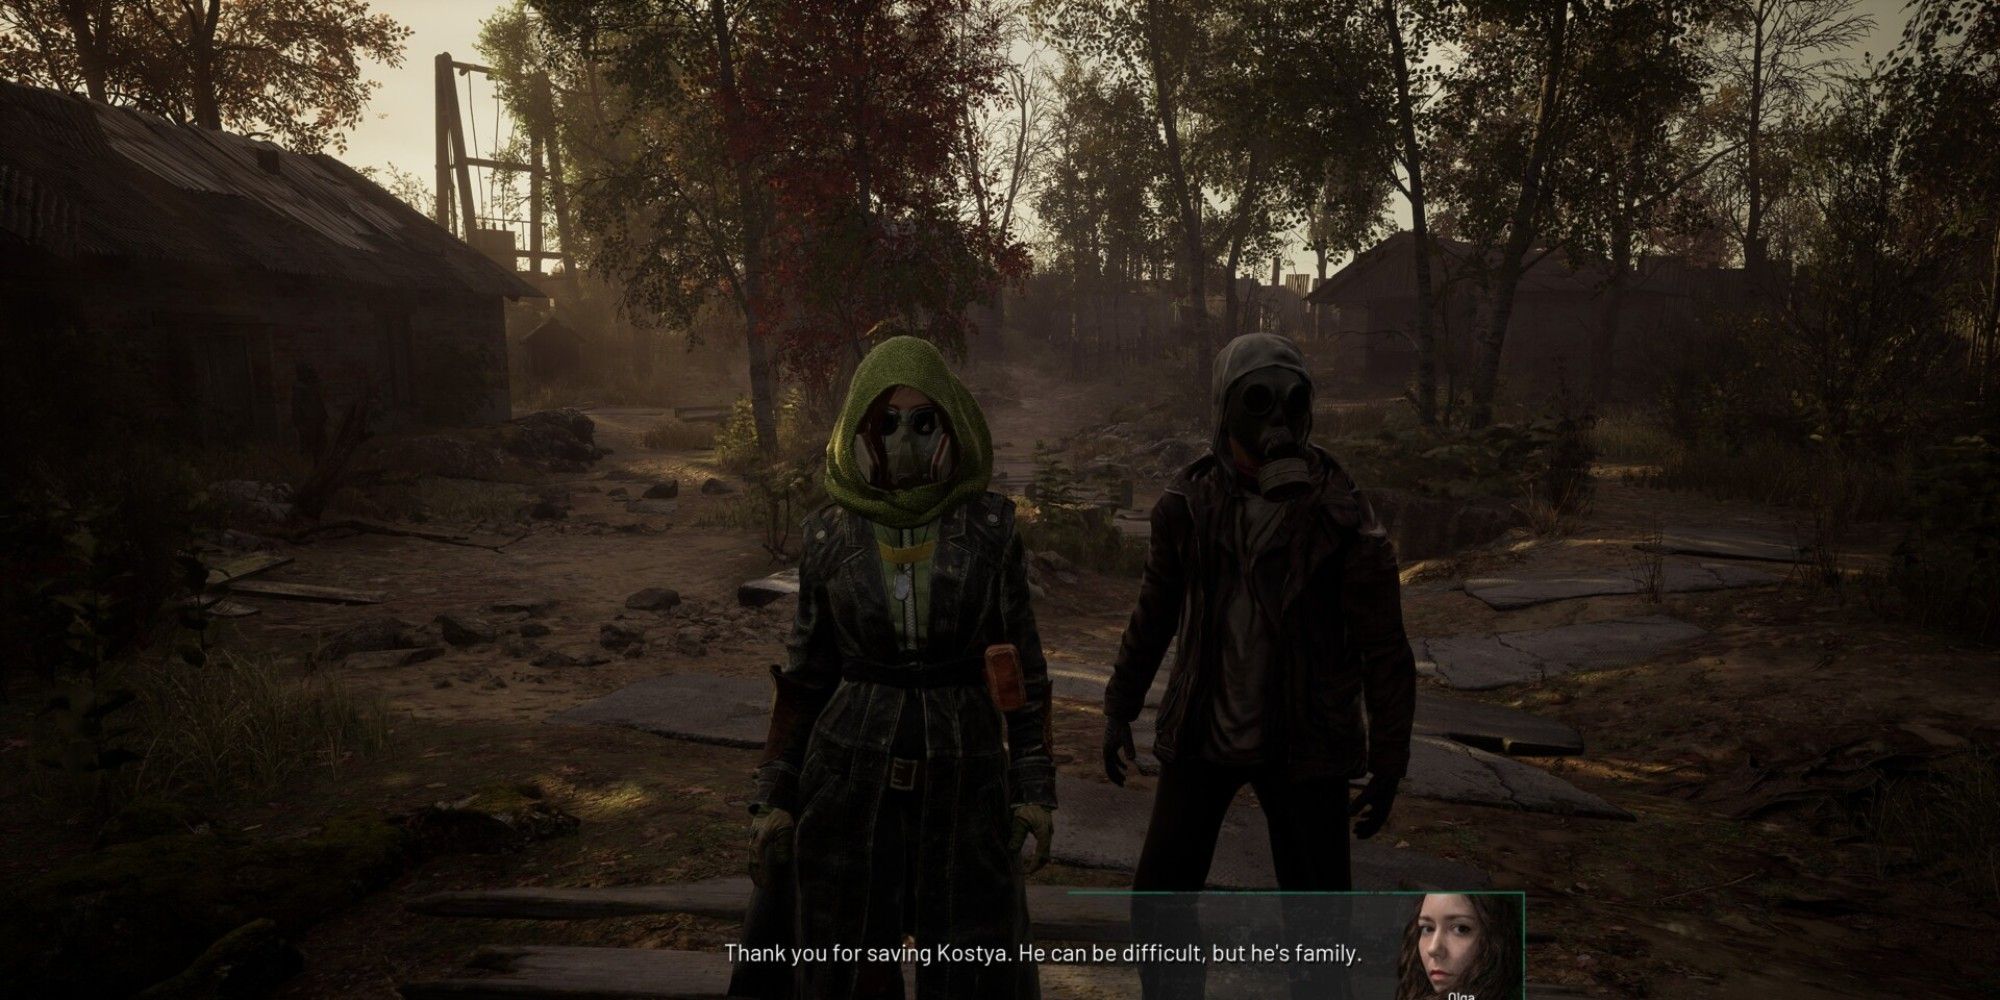 Wide shot of the companion Olga talking to the player next to a man in a hazmat suit